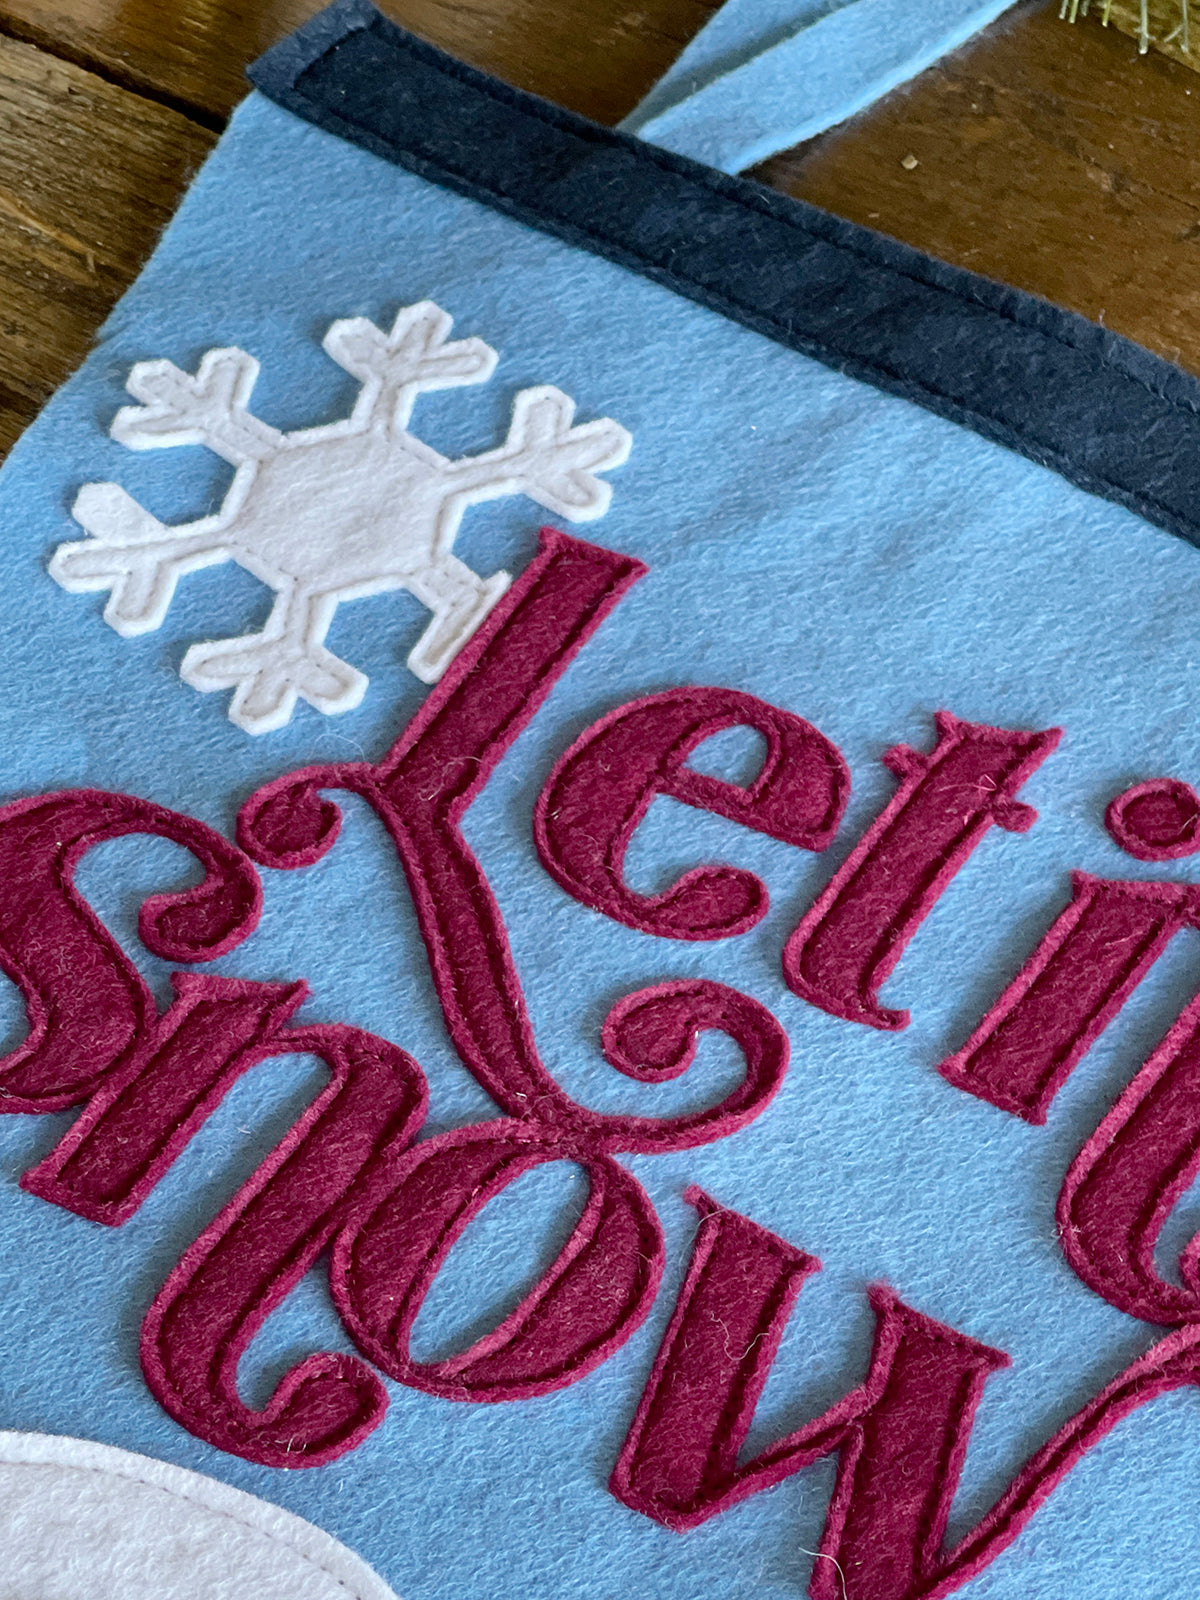 A close up photos of red felt lettering spelling 'Let it snow' and a white snowflake sewn onto a light blue background.